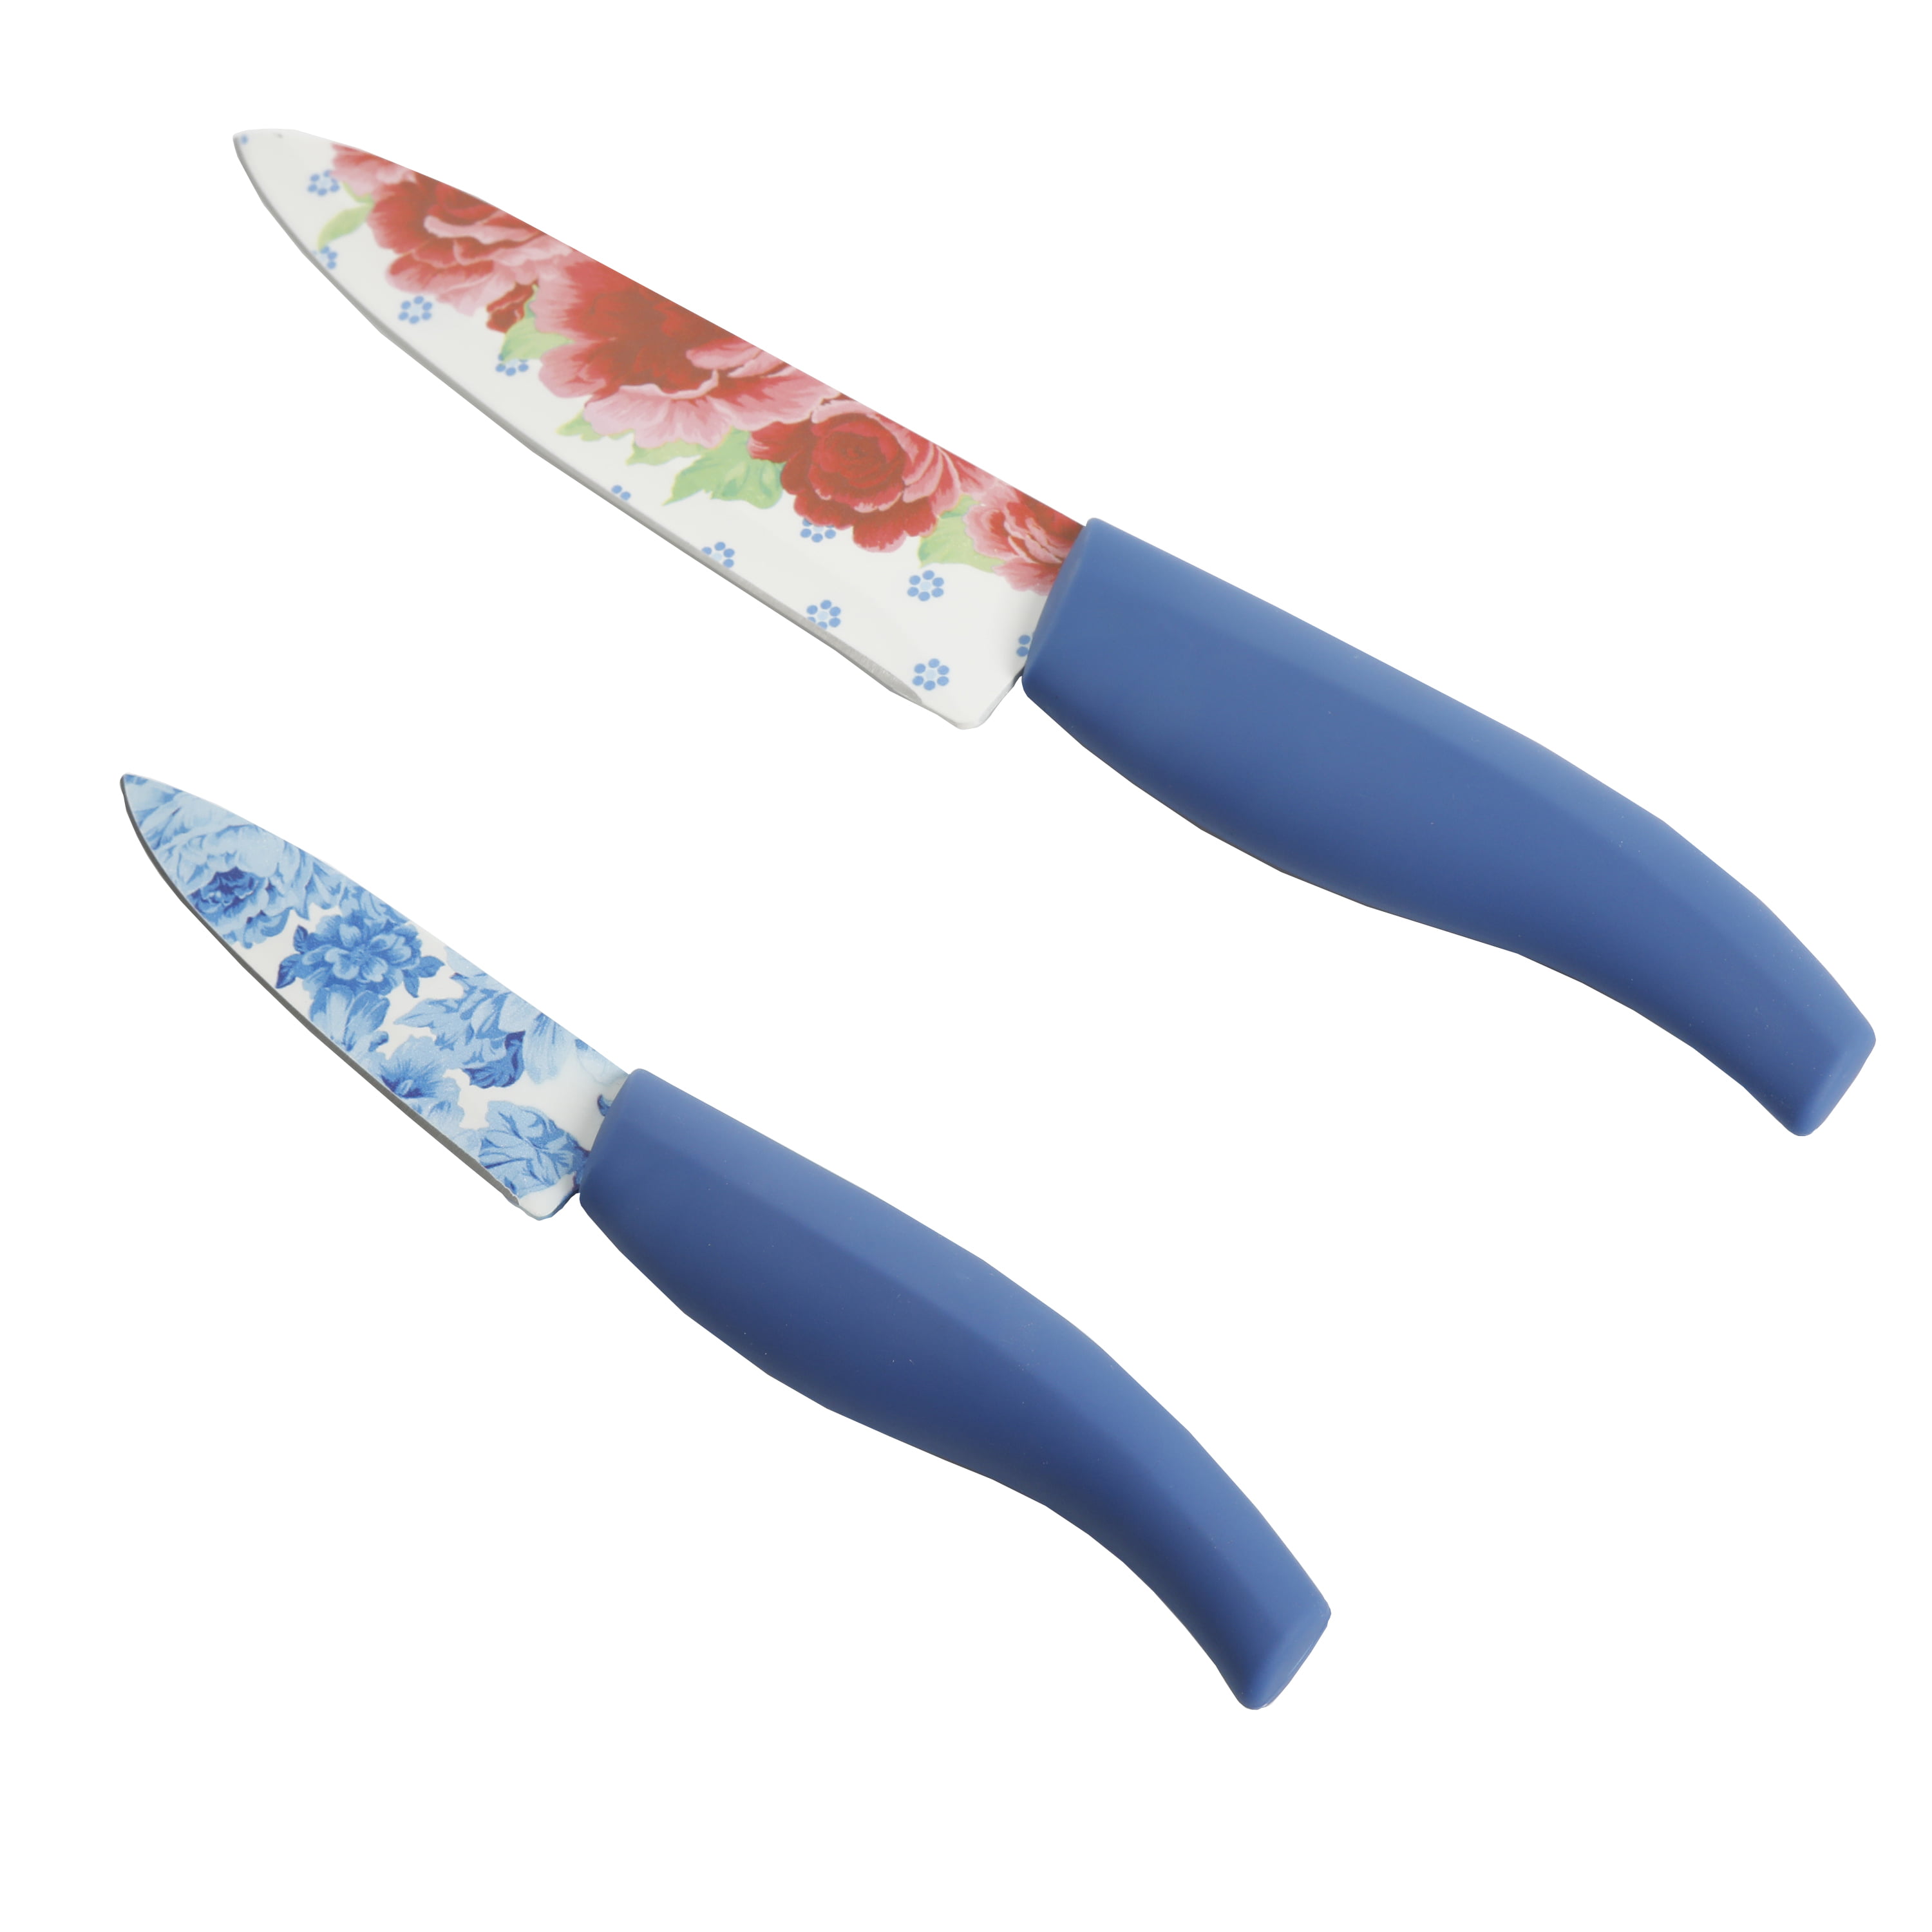 Garden Glamour by Duchess Designs: The Cutting Edge - Misen Knives Make  Great Holiday Gifts: Professional Culinary Quality, Handsome Design &  Precision Power